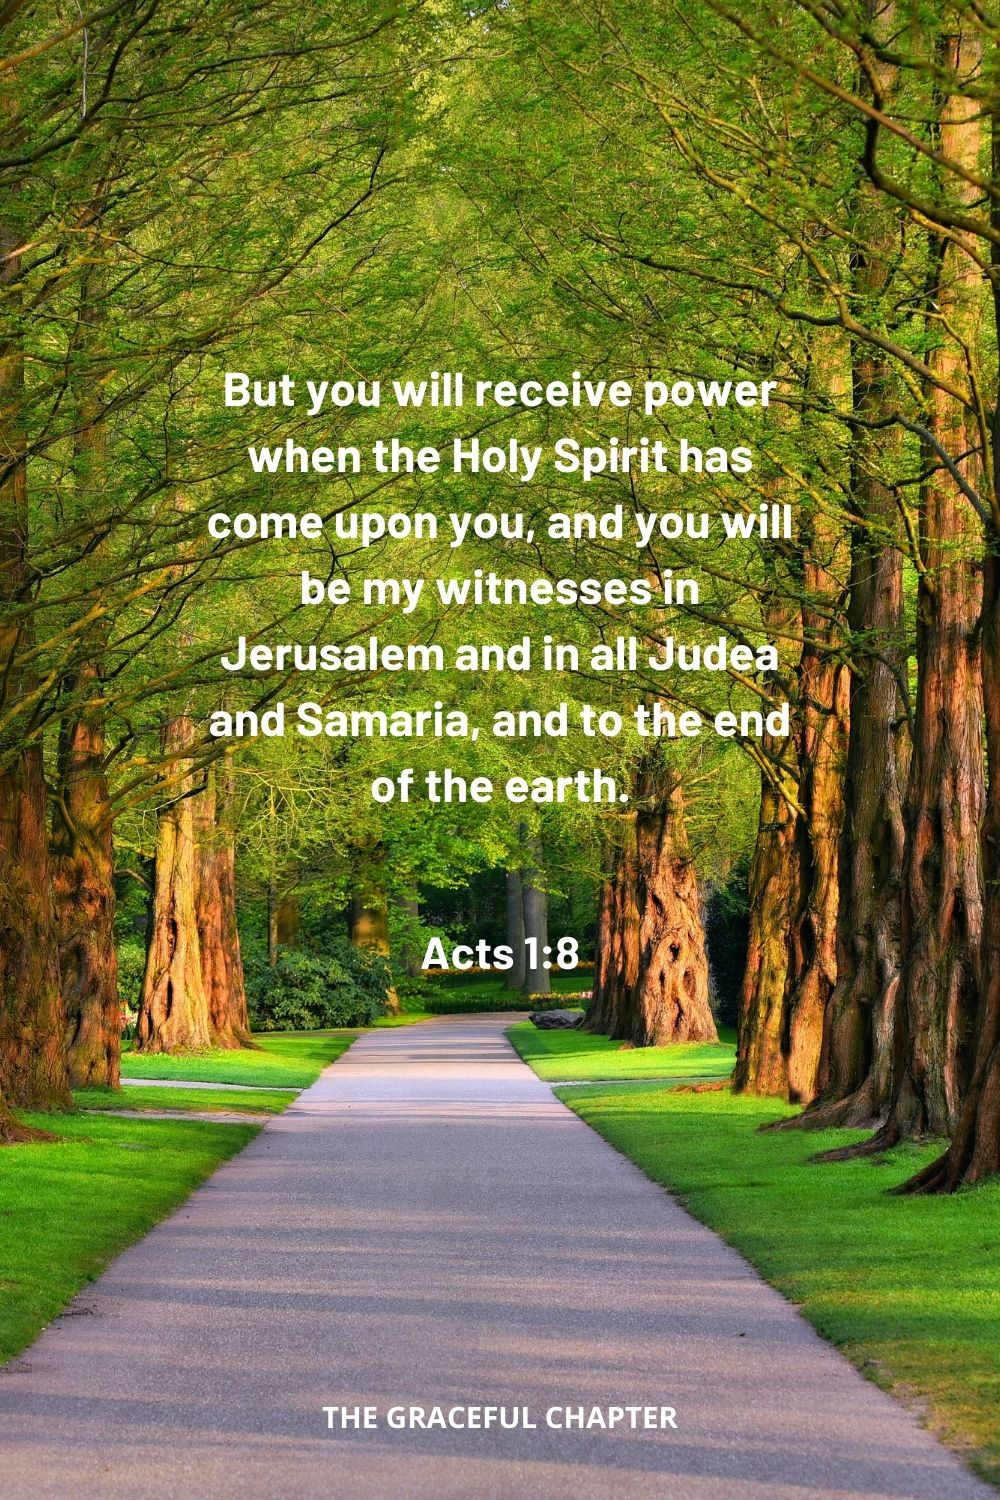 But you will receive power when the Holy Spirit has come upon you, and you will be my witnesses in Jerusalem and in all Judea and Samaria, and to the end of the earth. Acts 1:8